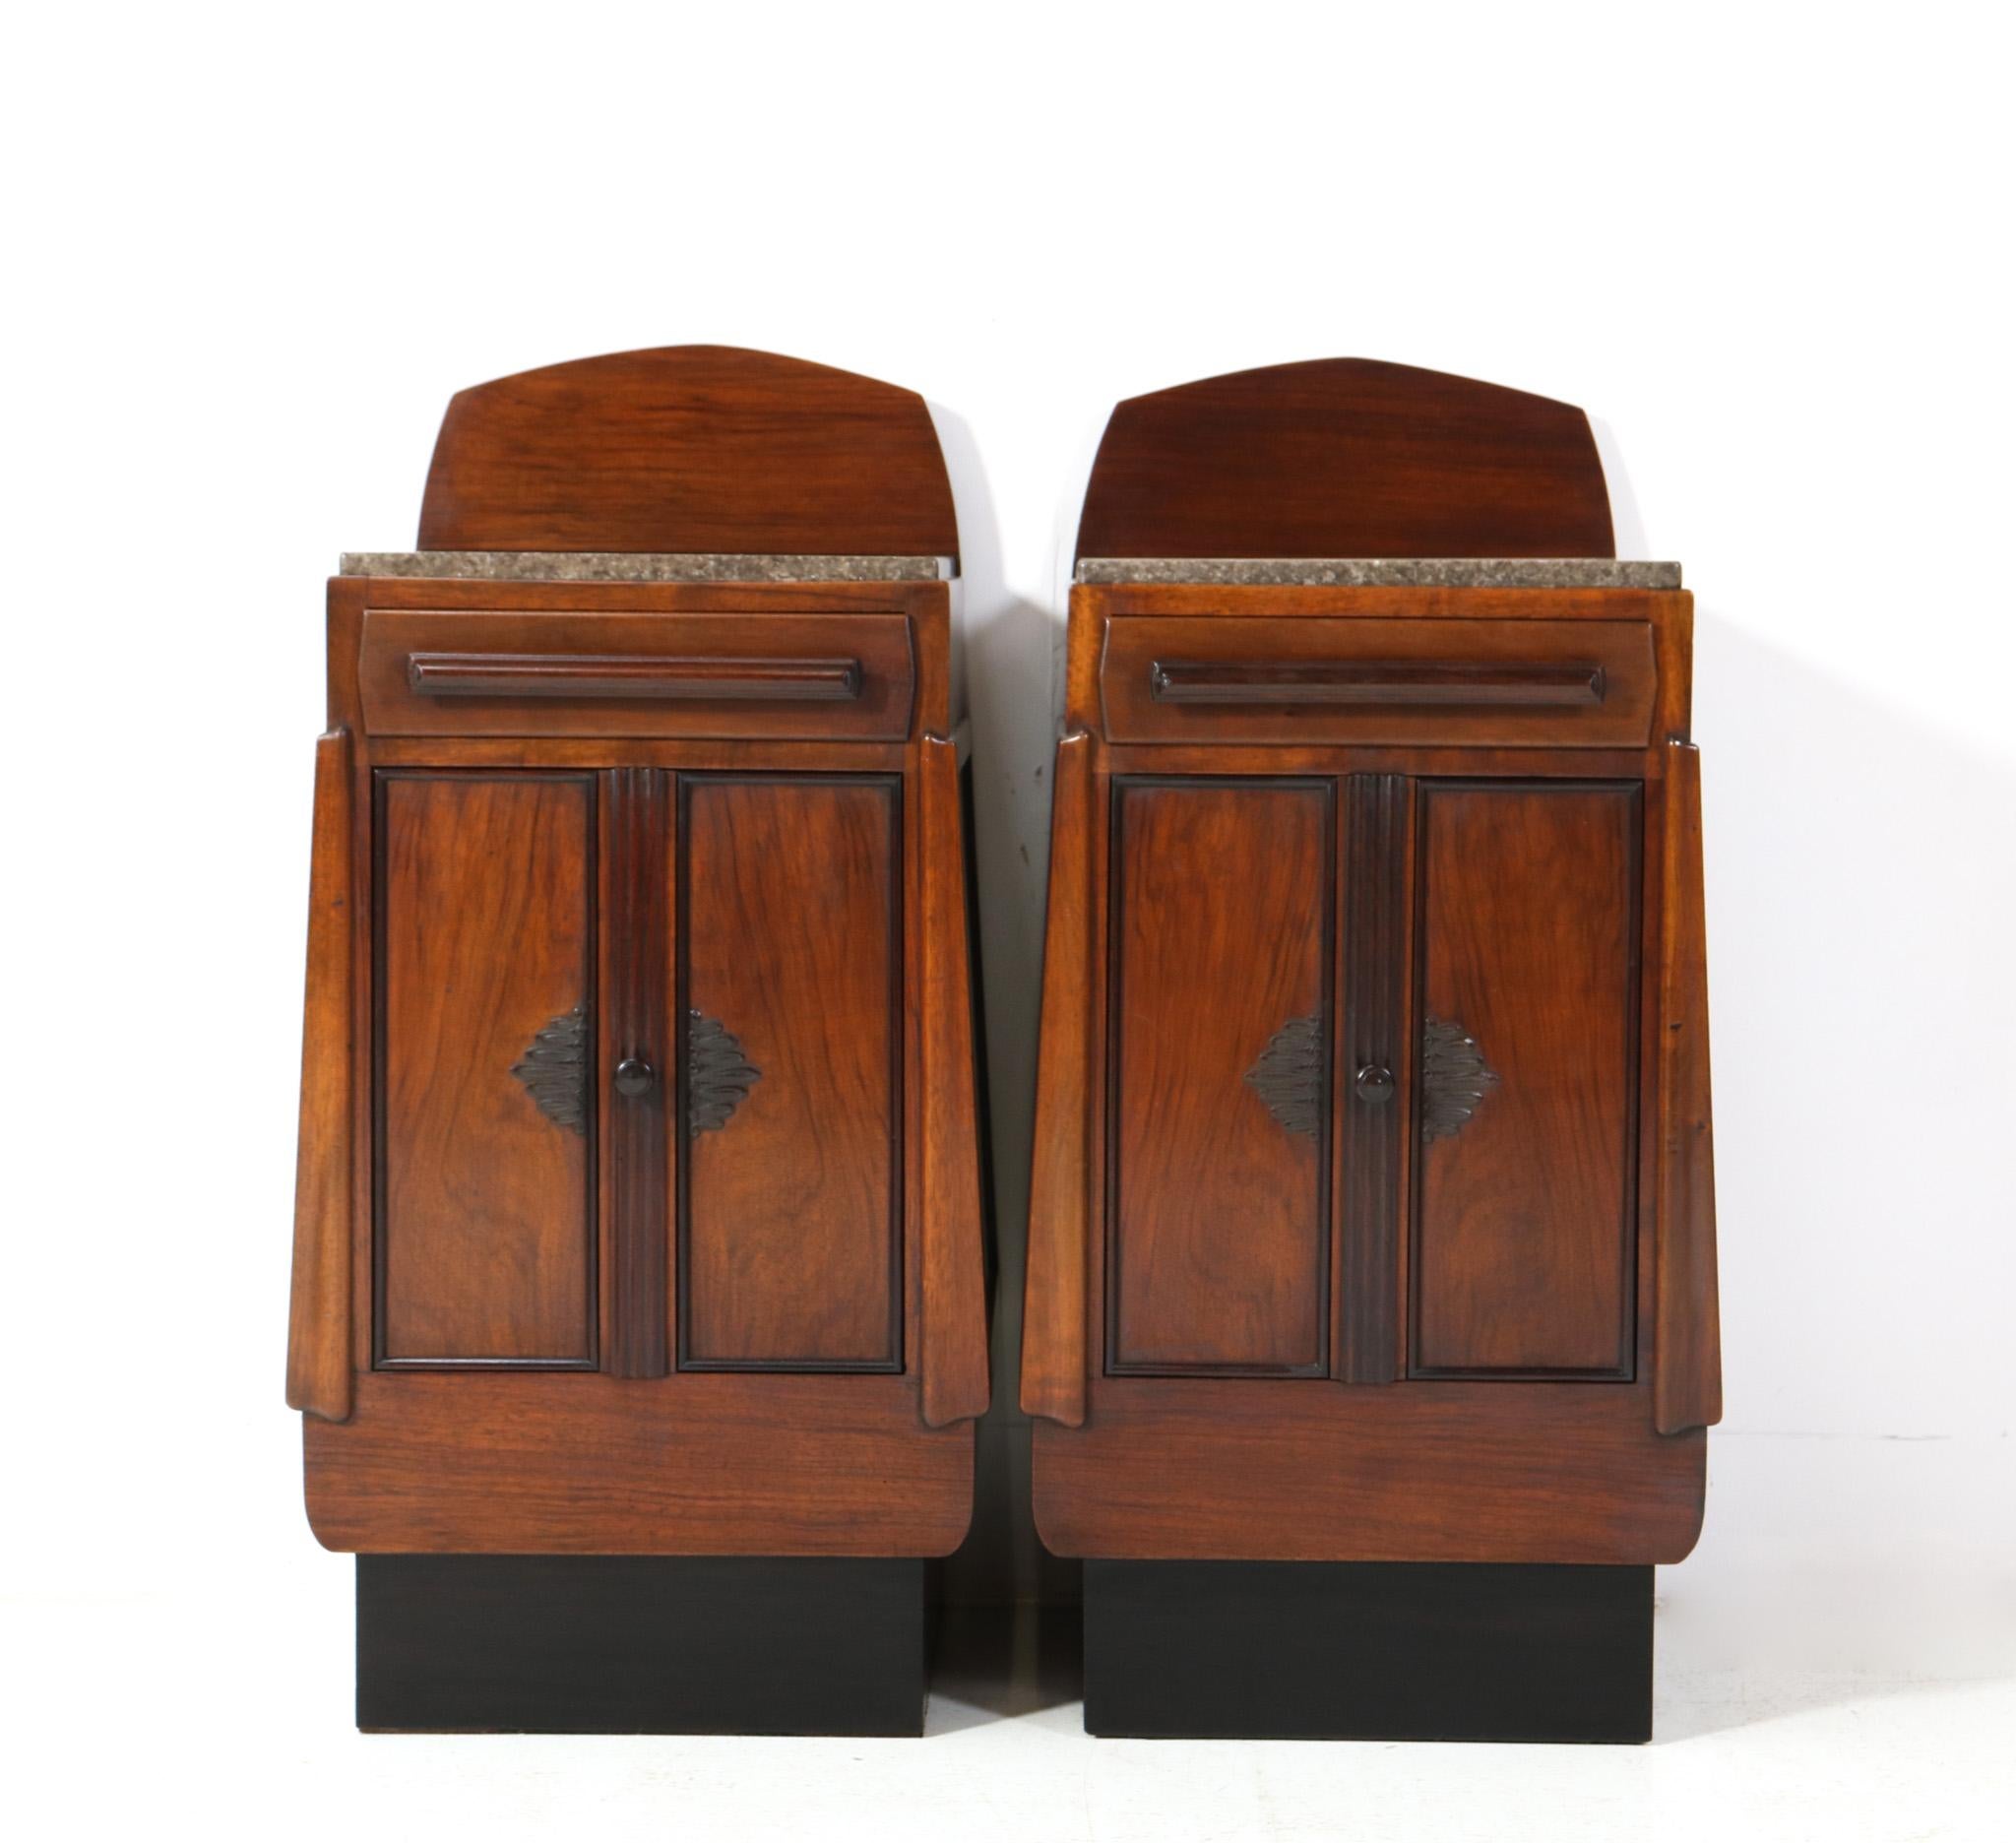 Magnificent and rare pair of Art Deco Amsterdamse School nightstands or bedside tables.
Striking Dutch design from the 1920s.
Solid walnut base with solid macassar ebony decorative elements.
This wonderful pair of Art Deco Amsterdamse School